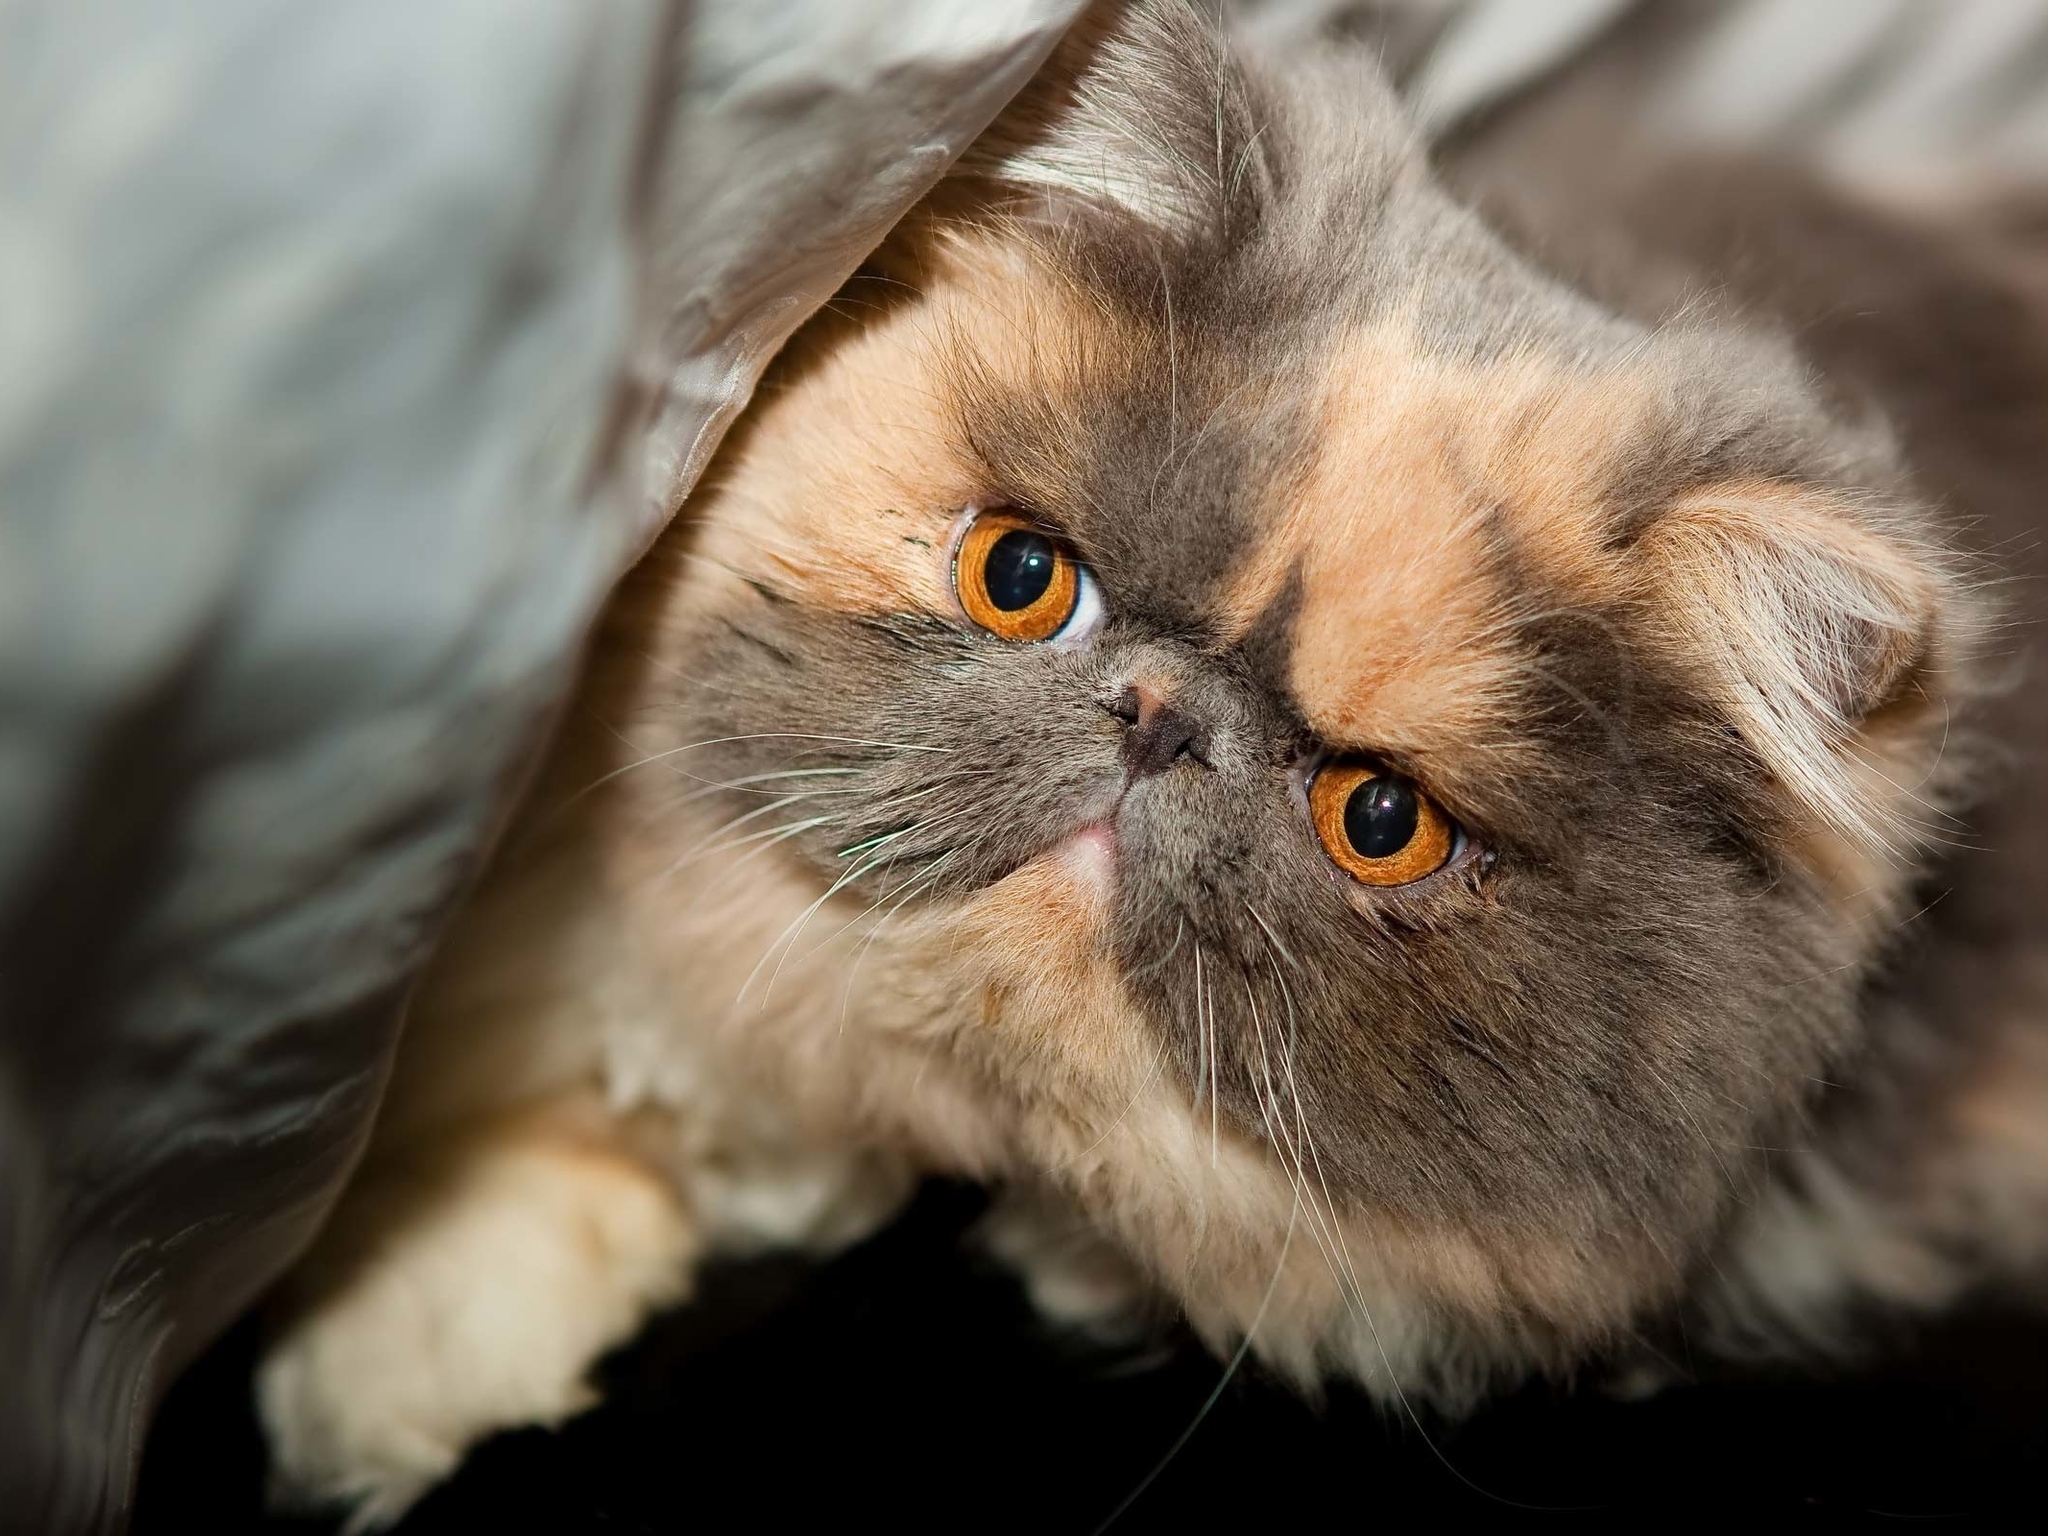 Image: Cat, eyes, Persian, purebred, snout, fluffy, lies